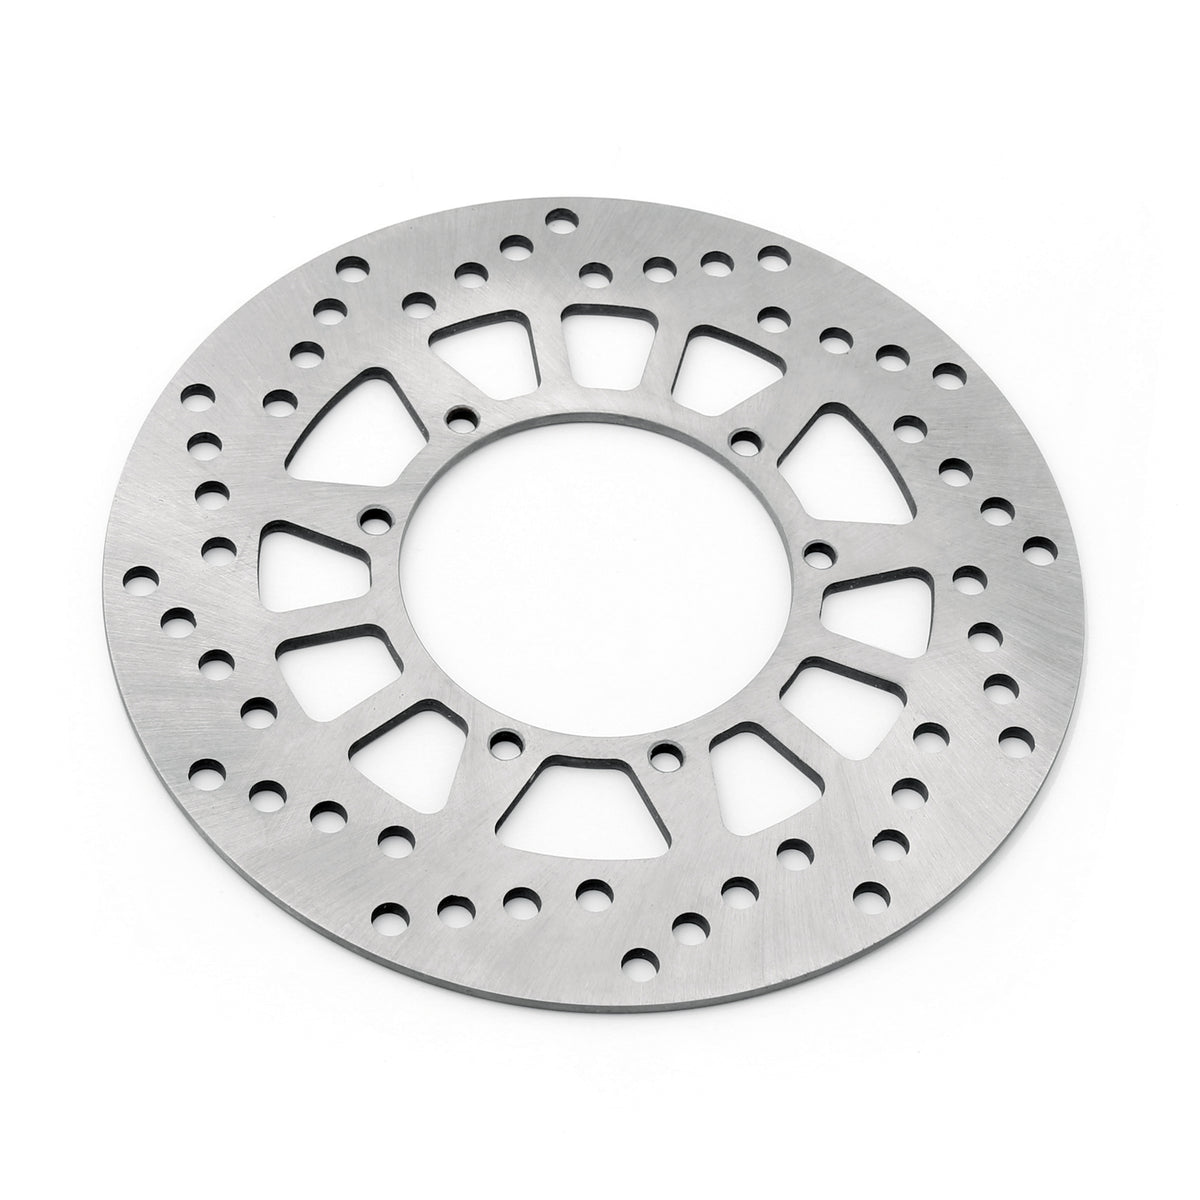 Front Brake Disc Rotor Fit for Yamaha TTR230 05-13 XTZ125 04-10 YZ 125/250/490